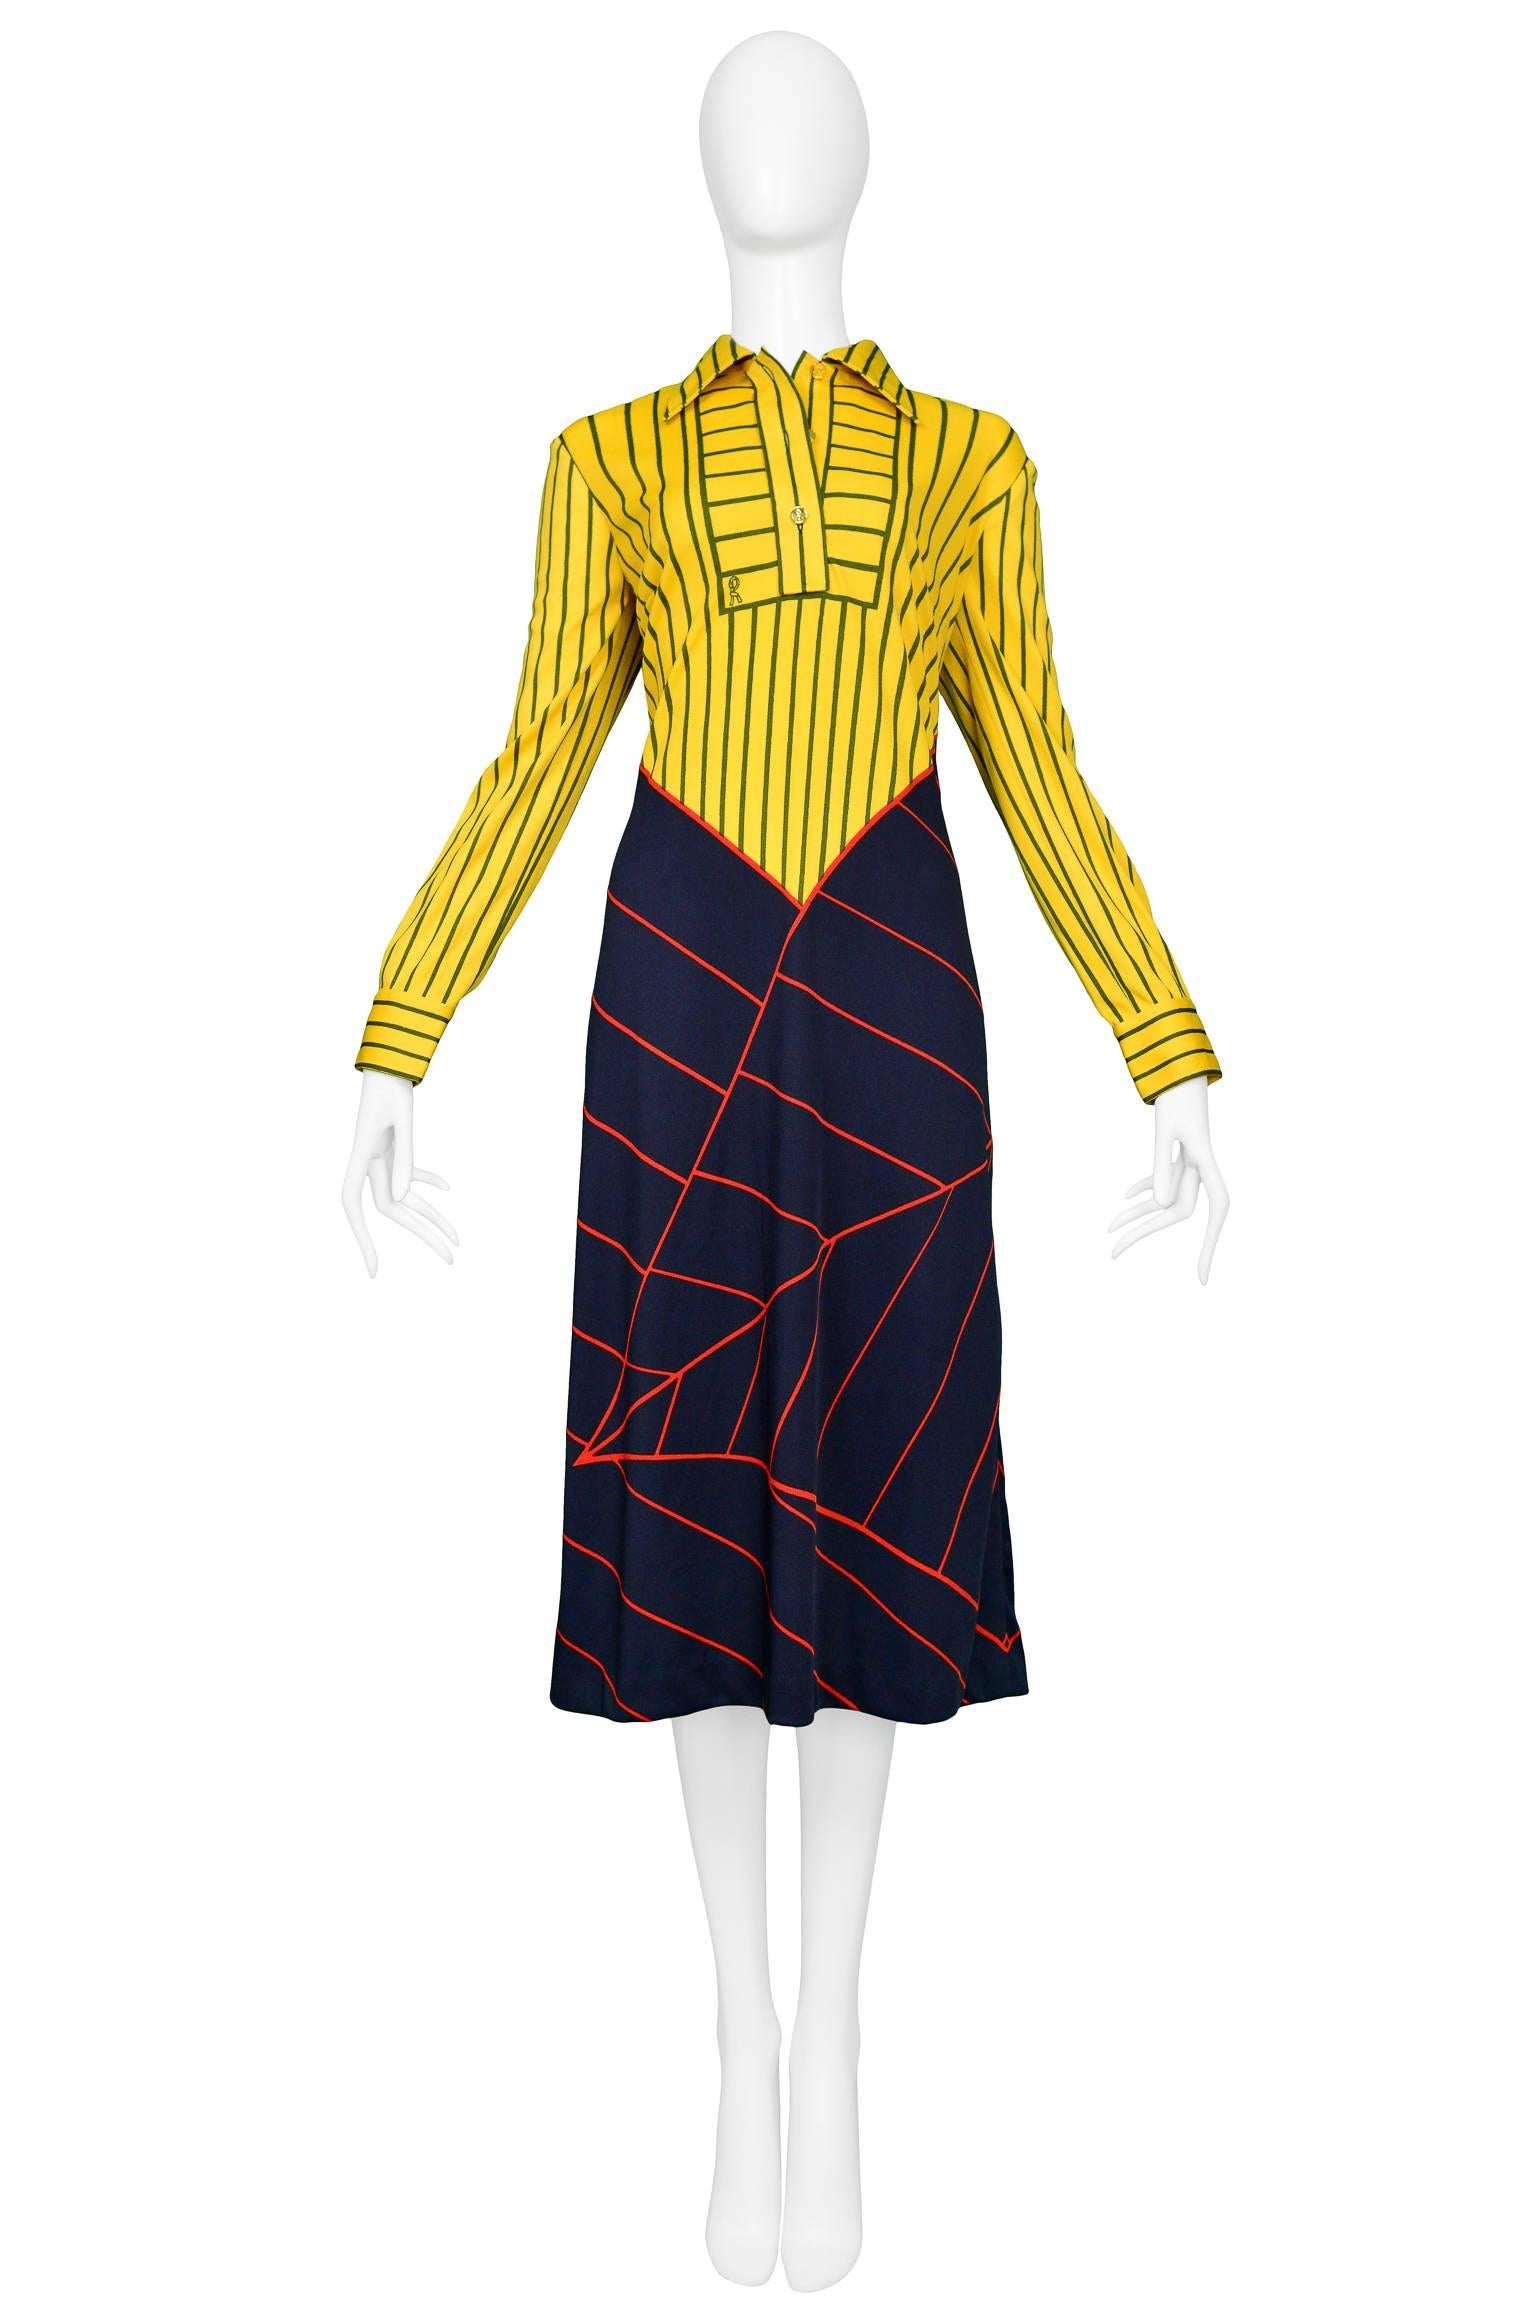 Vintage yellow, red and blue Roberta di Camerino trompe jersey day dress with sleeves. Dress features signature Roberta print and gold tone buttons. Roberta Di Camerino archive sample dress. 